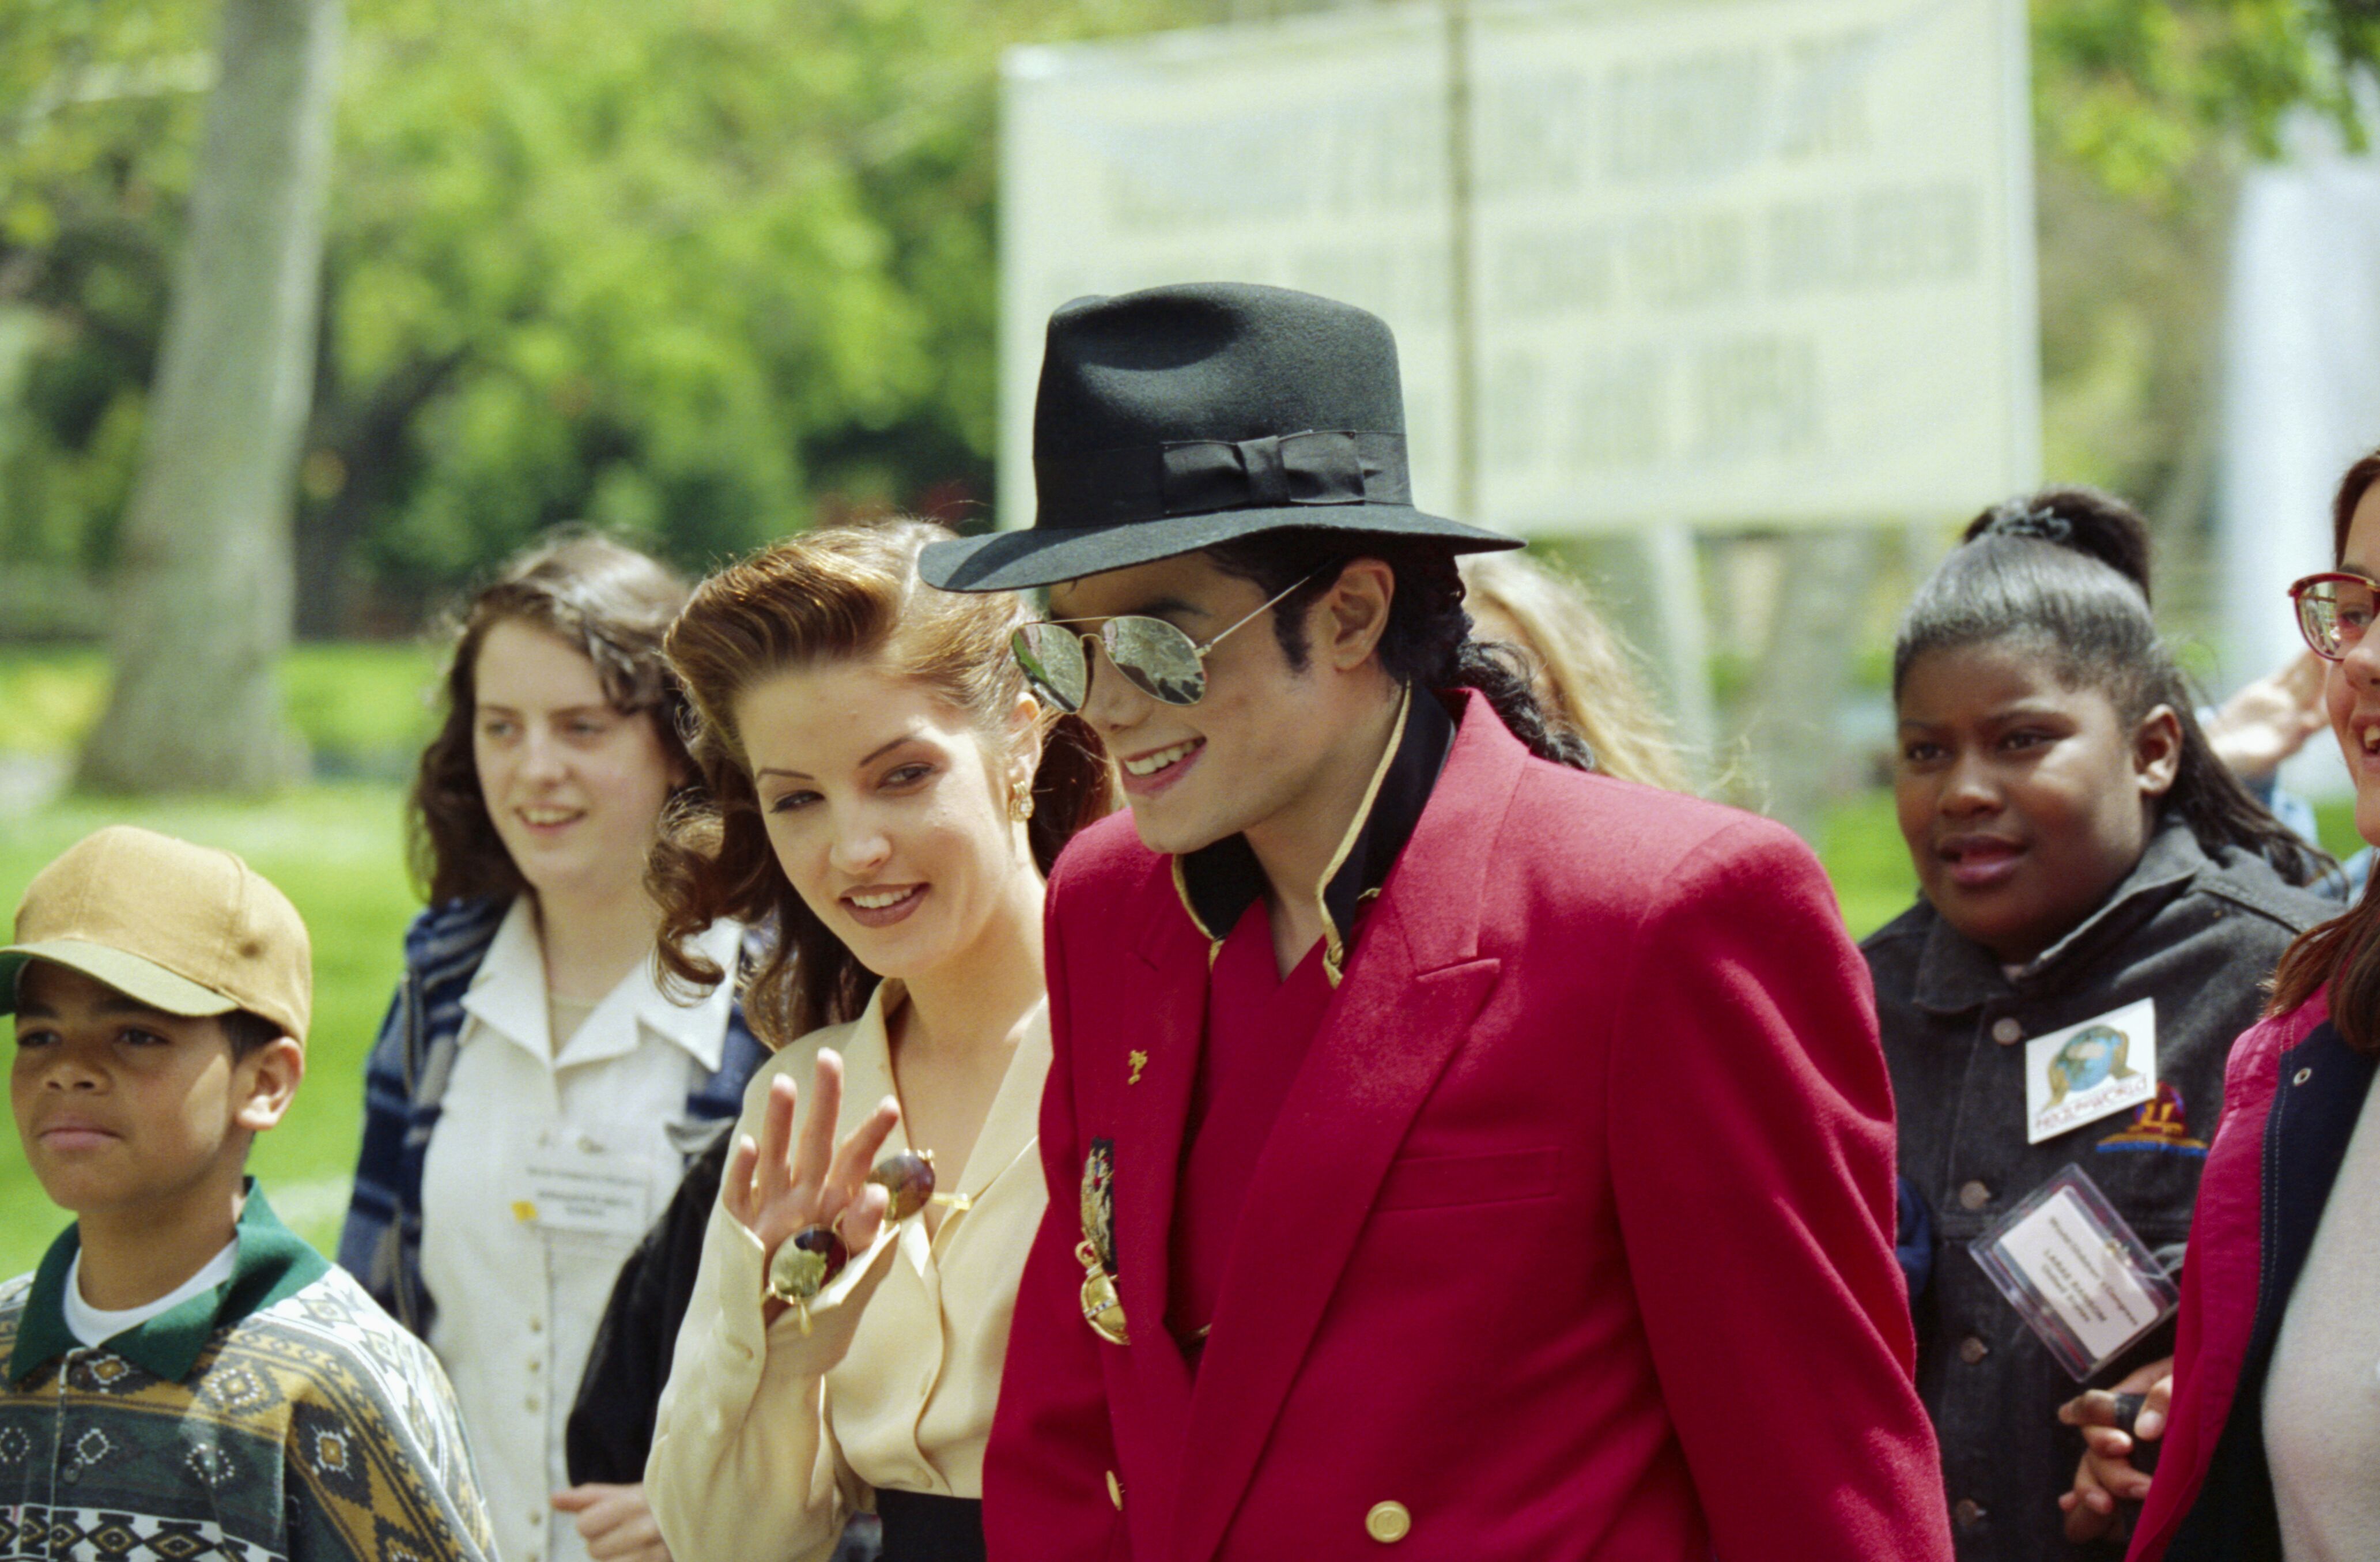 Michael Jackson and Lisa Marie Presley in 1995 | Source: Gerry Images